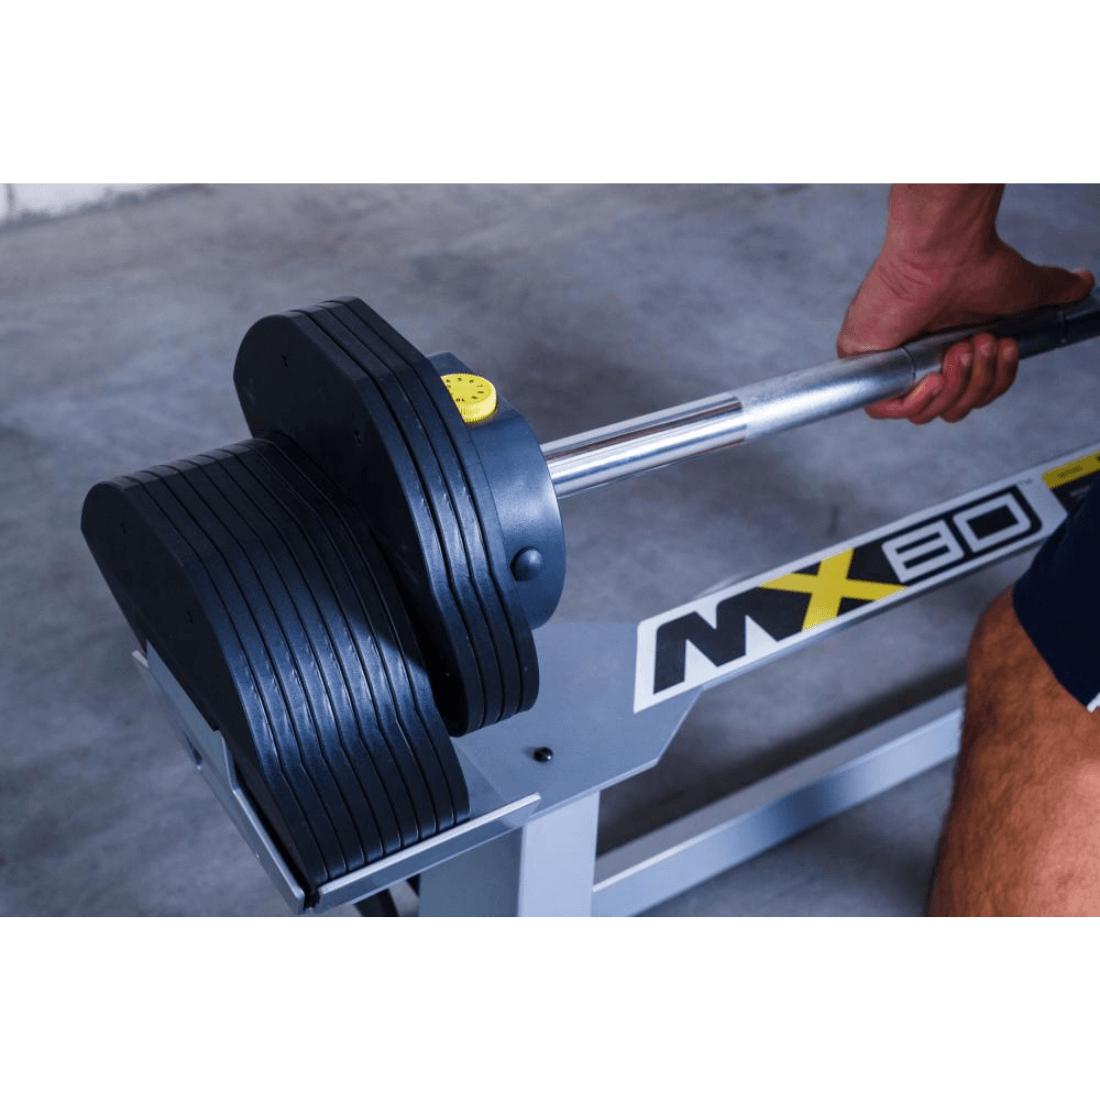 MX Select Adjustable EZ Curl Bar MX80 Weight System in Use